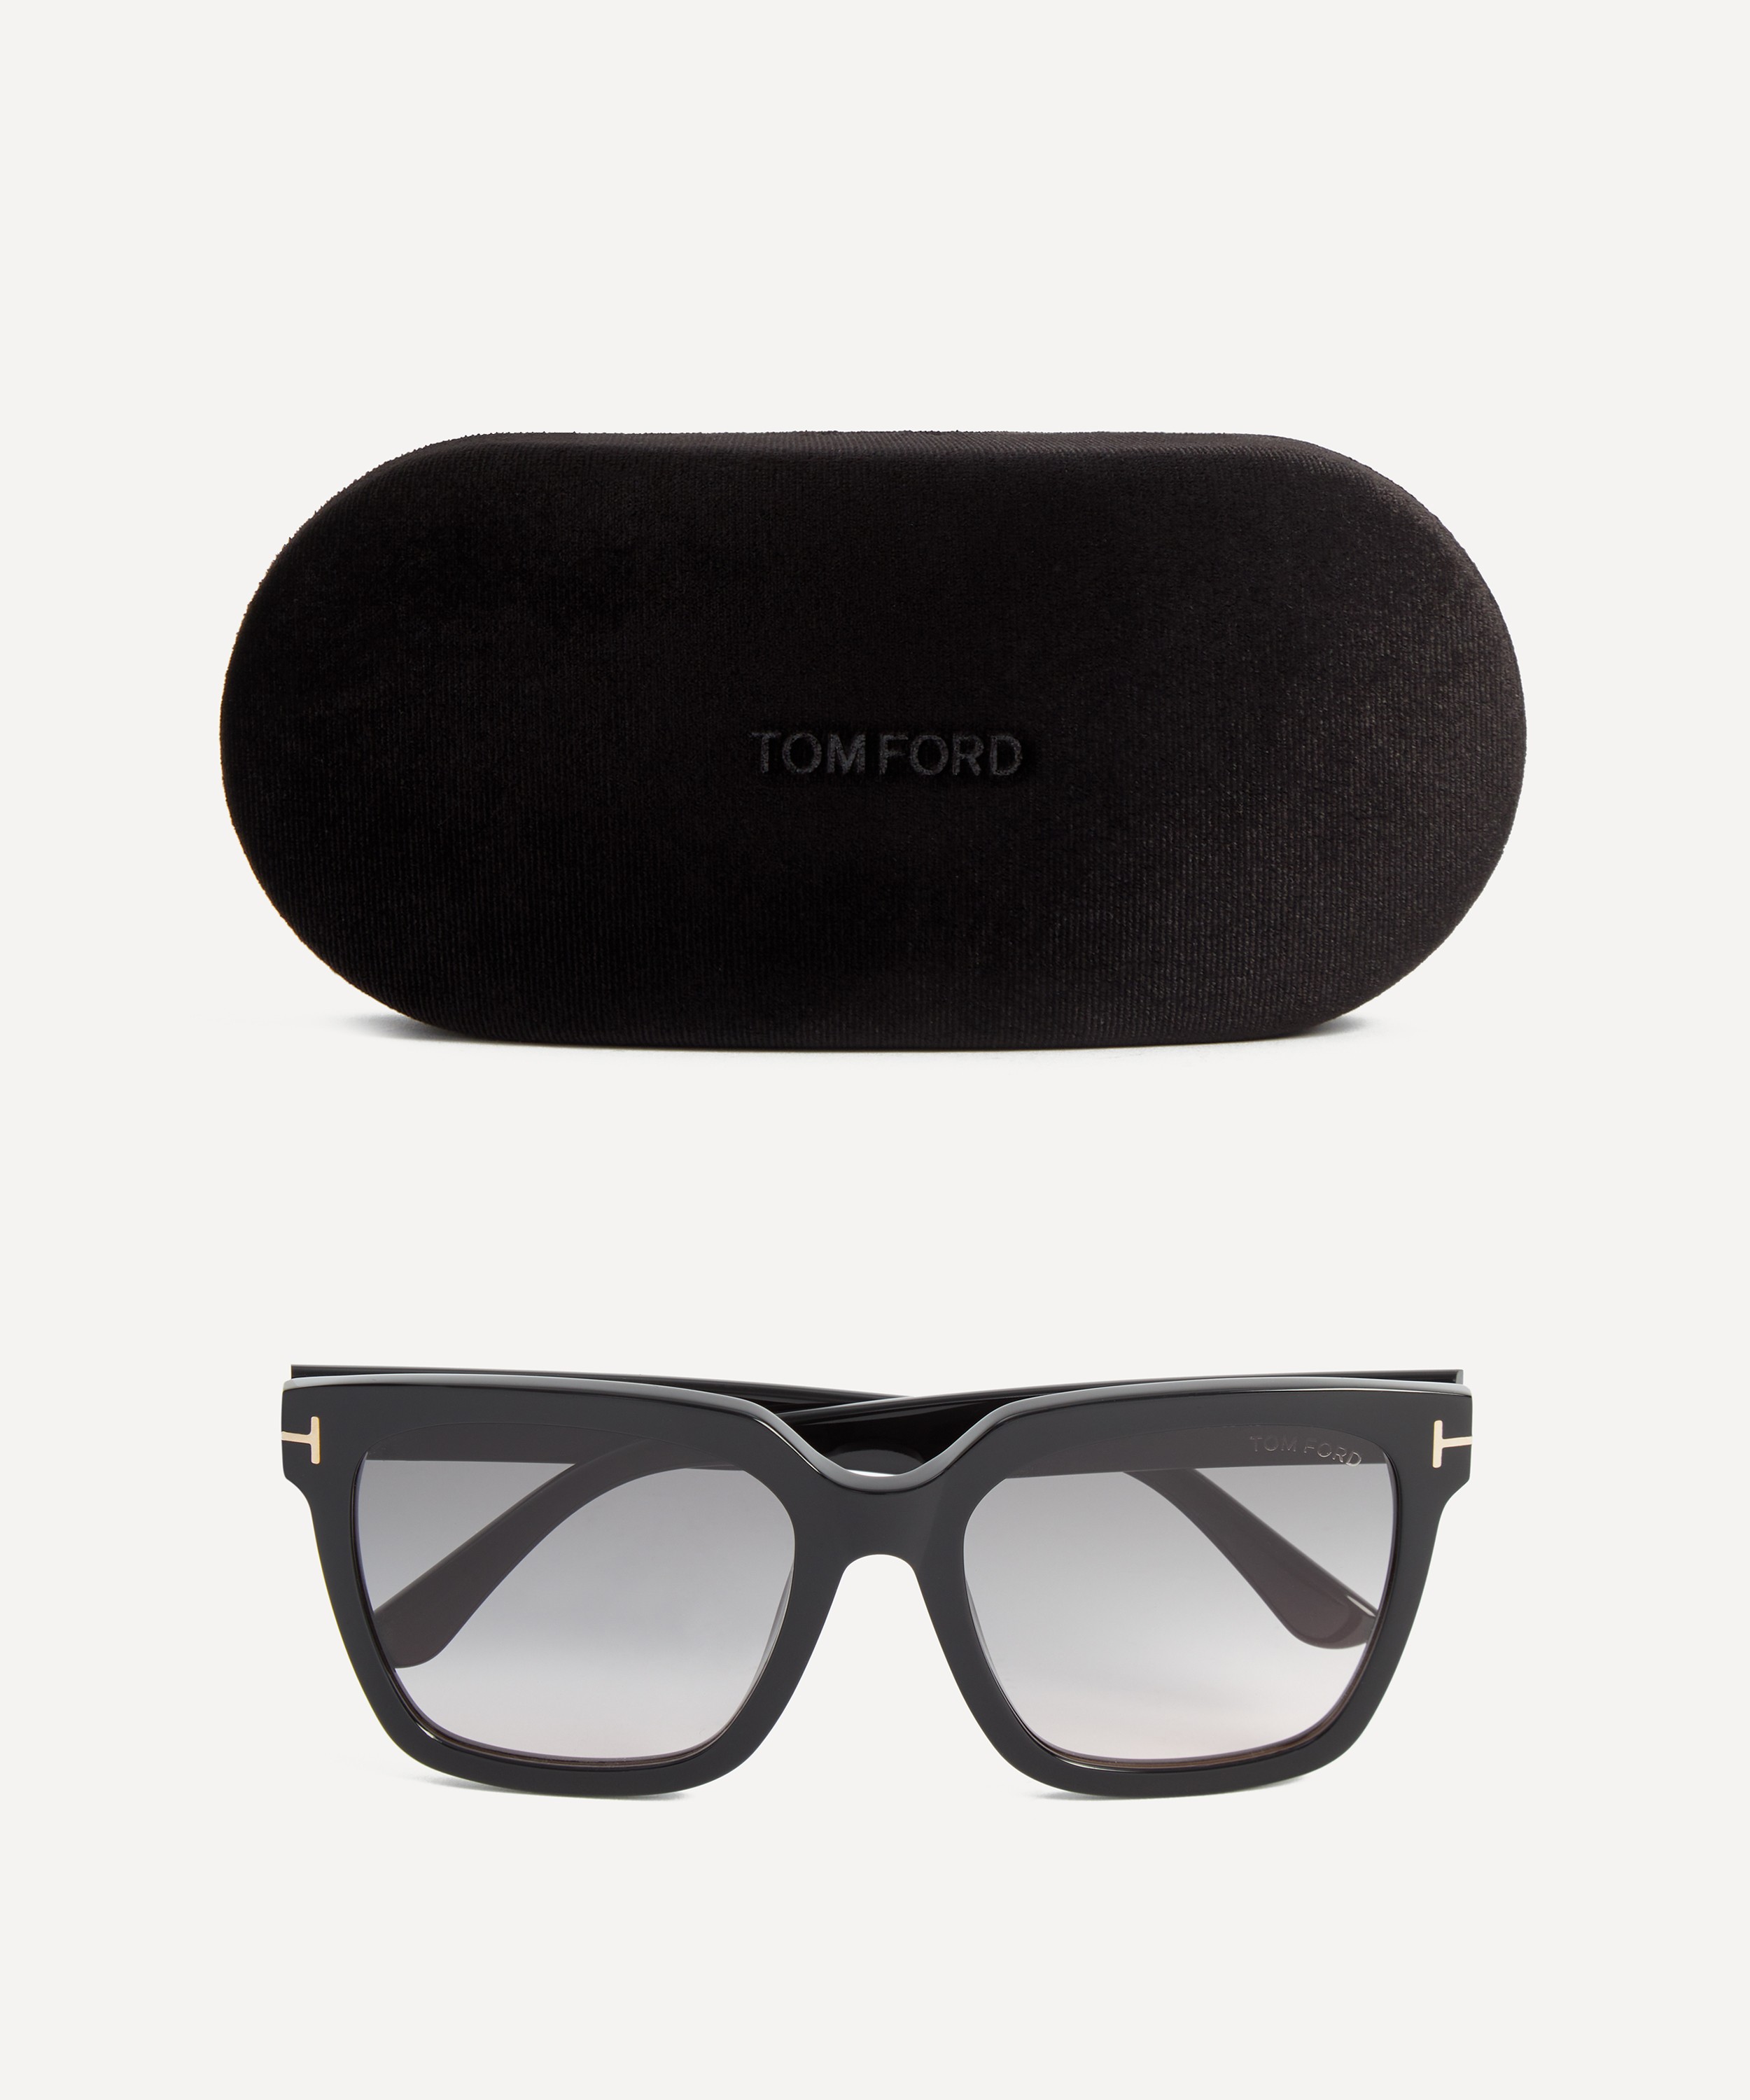 Tom Ford - Selby Square Sunglasses image number 3